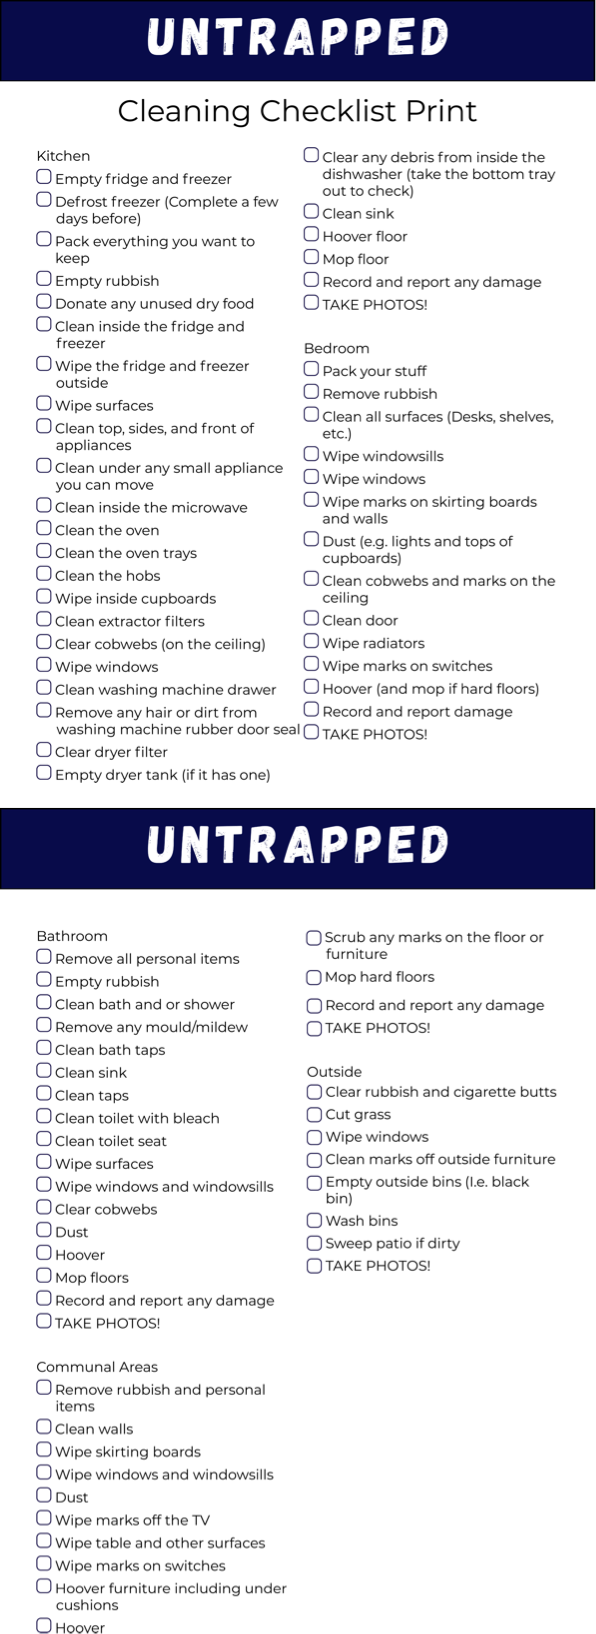 Untrapped Template Student Cleaning Checklist